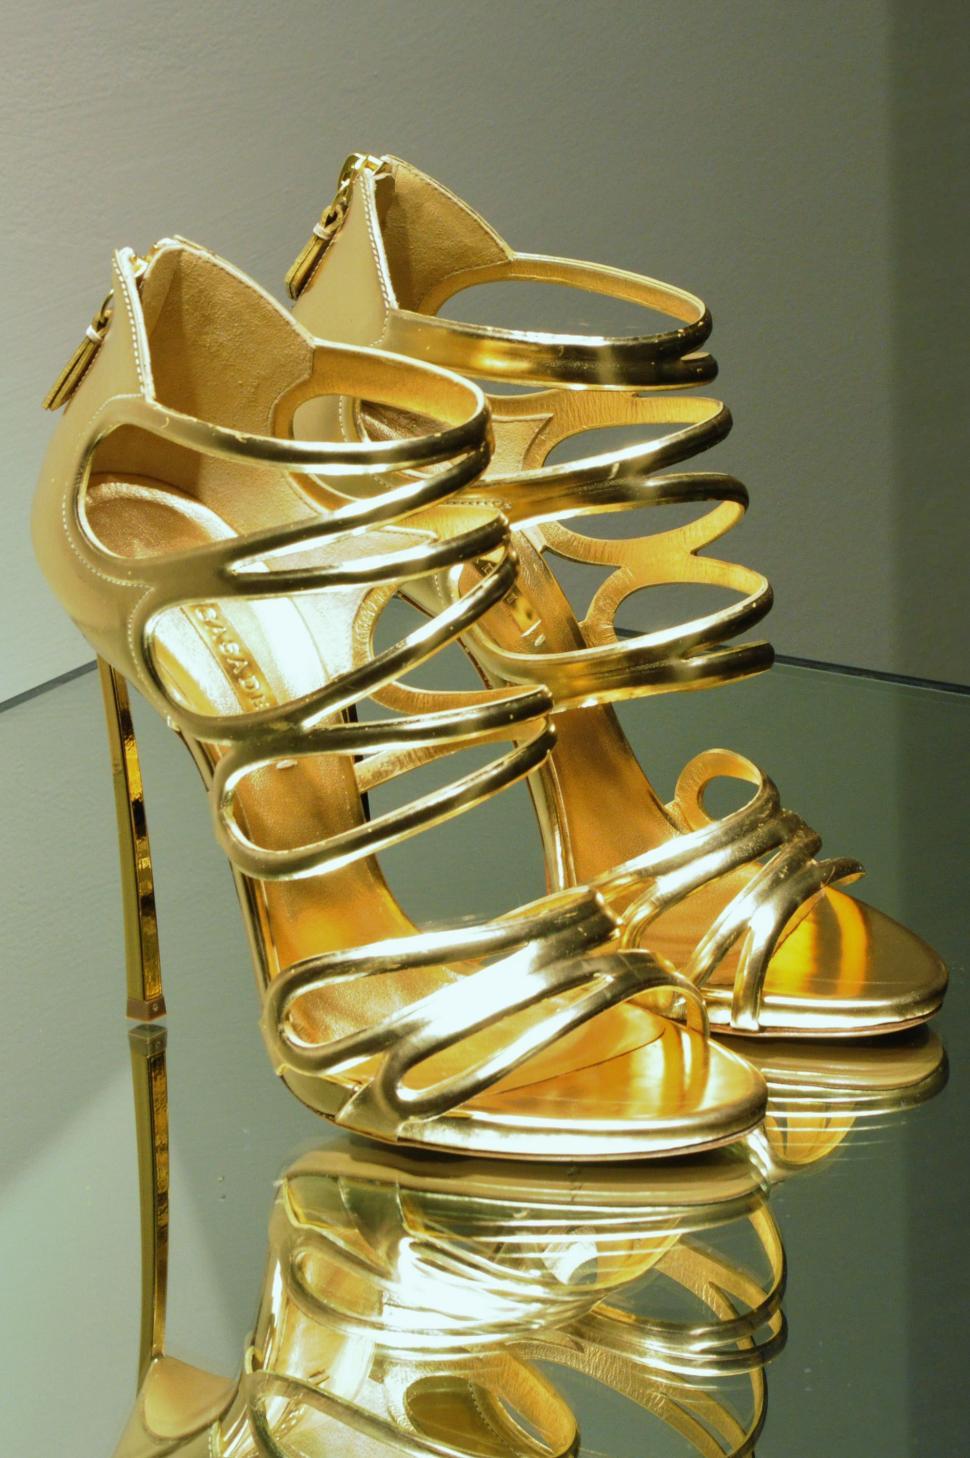 Free Image of Gold High Heels on Glass Table 